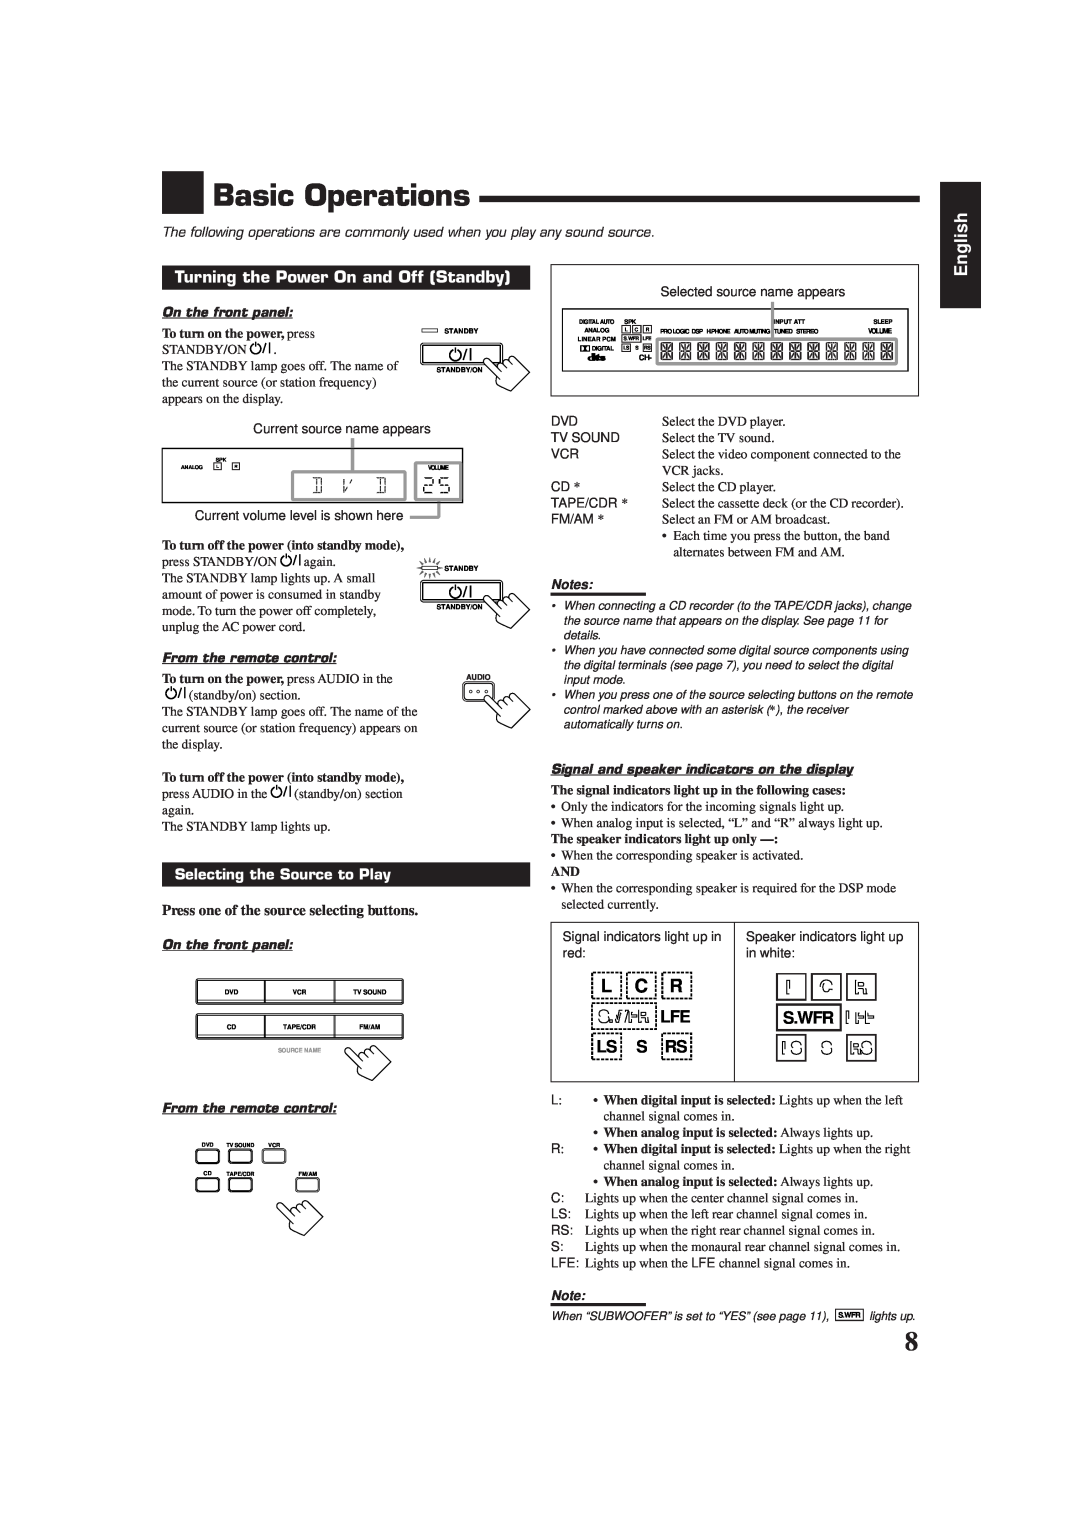 JVC RX-6012VSL manual Basic Operations, L C R, English, Turning the Power On and Off Standby, S.Wfr Lfe Ls S Rs 